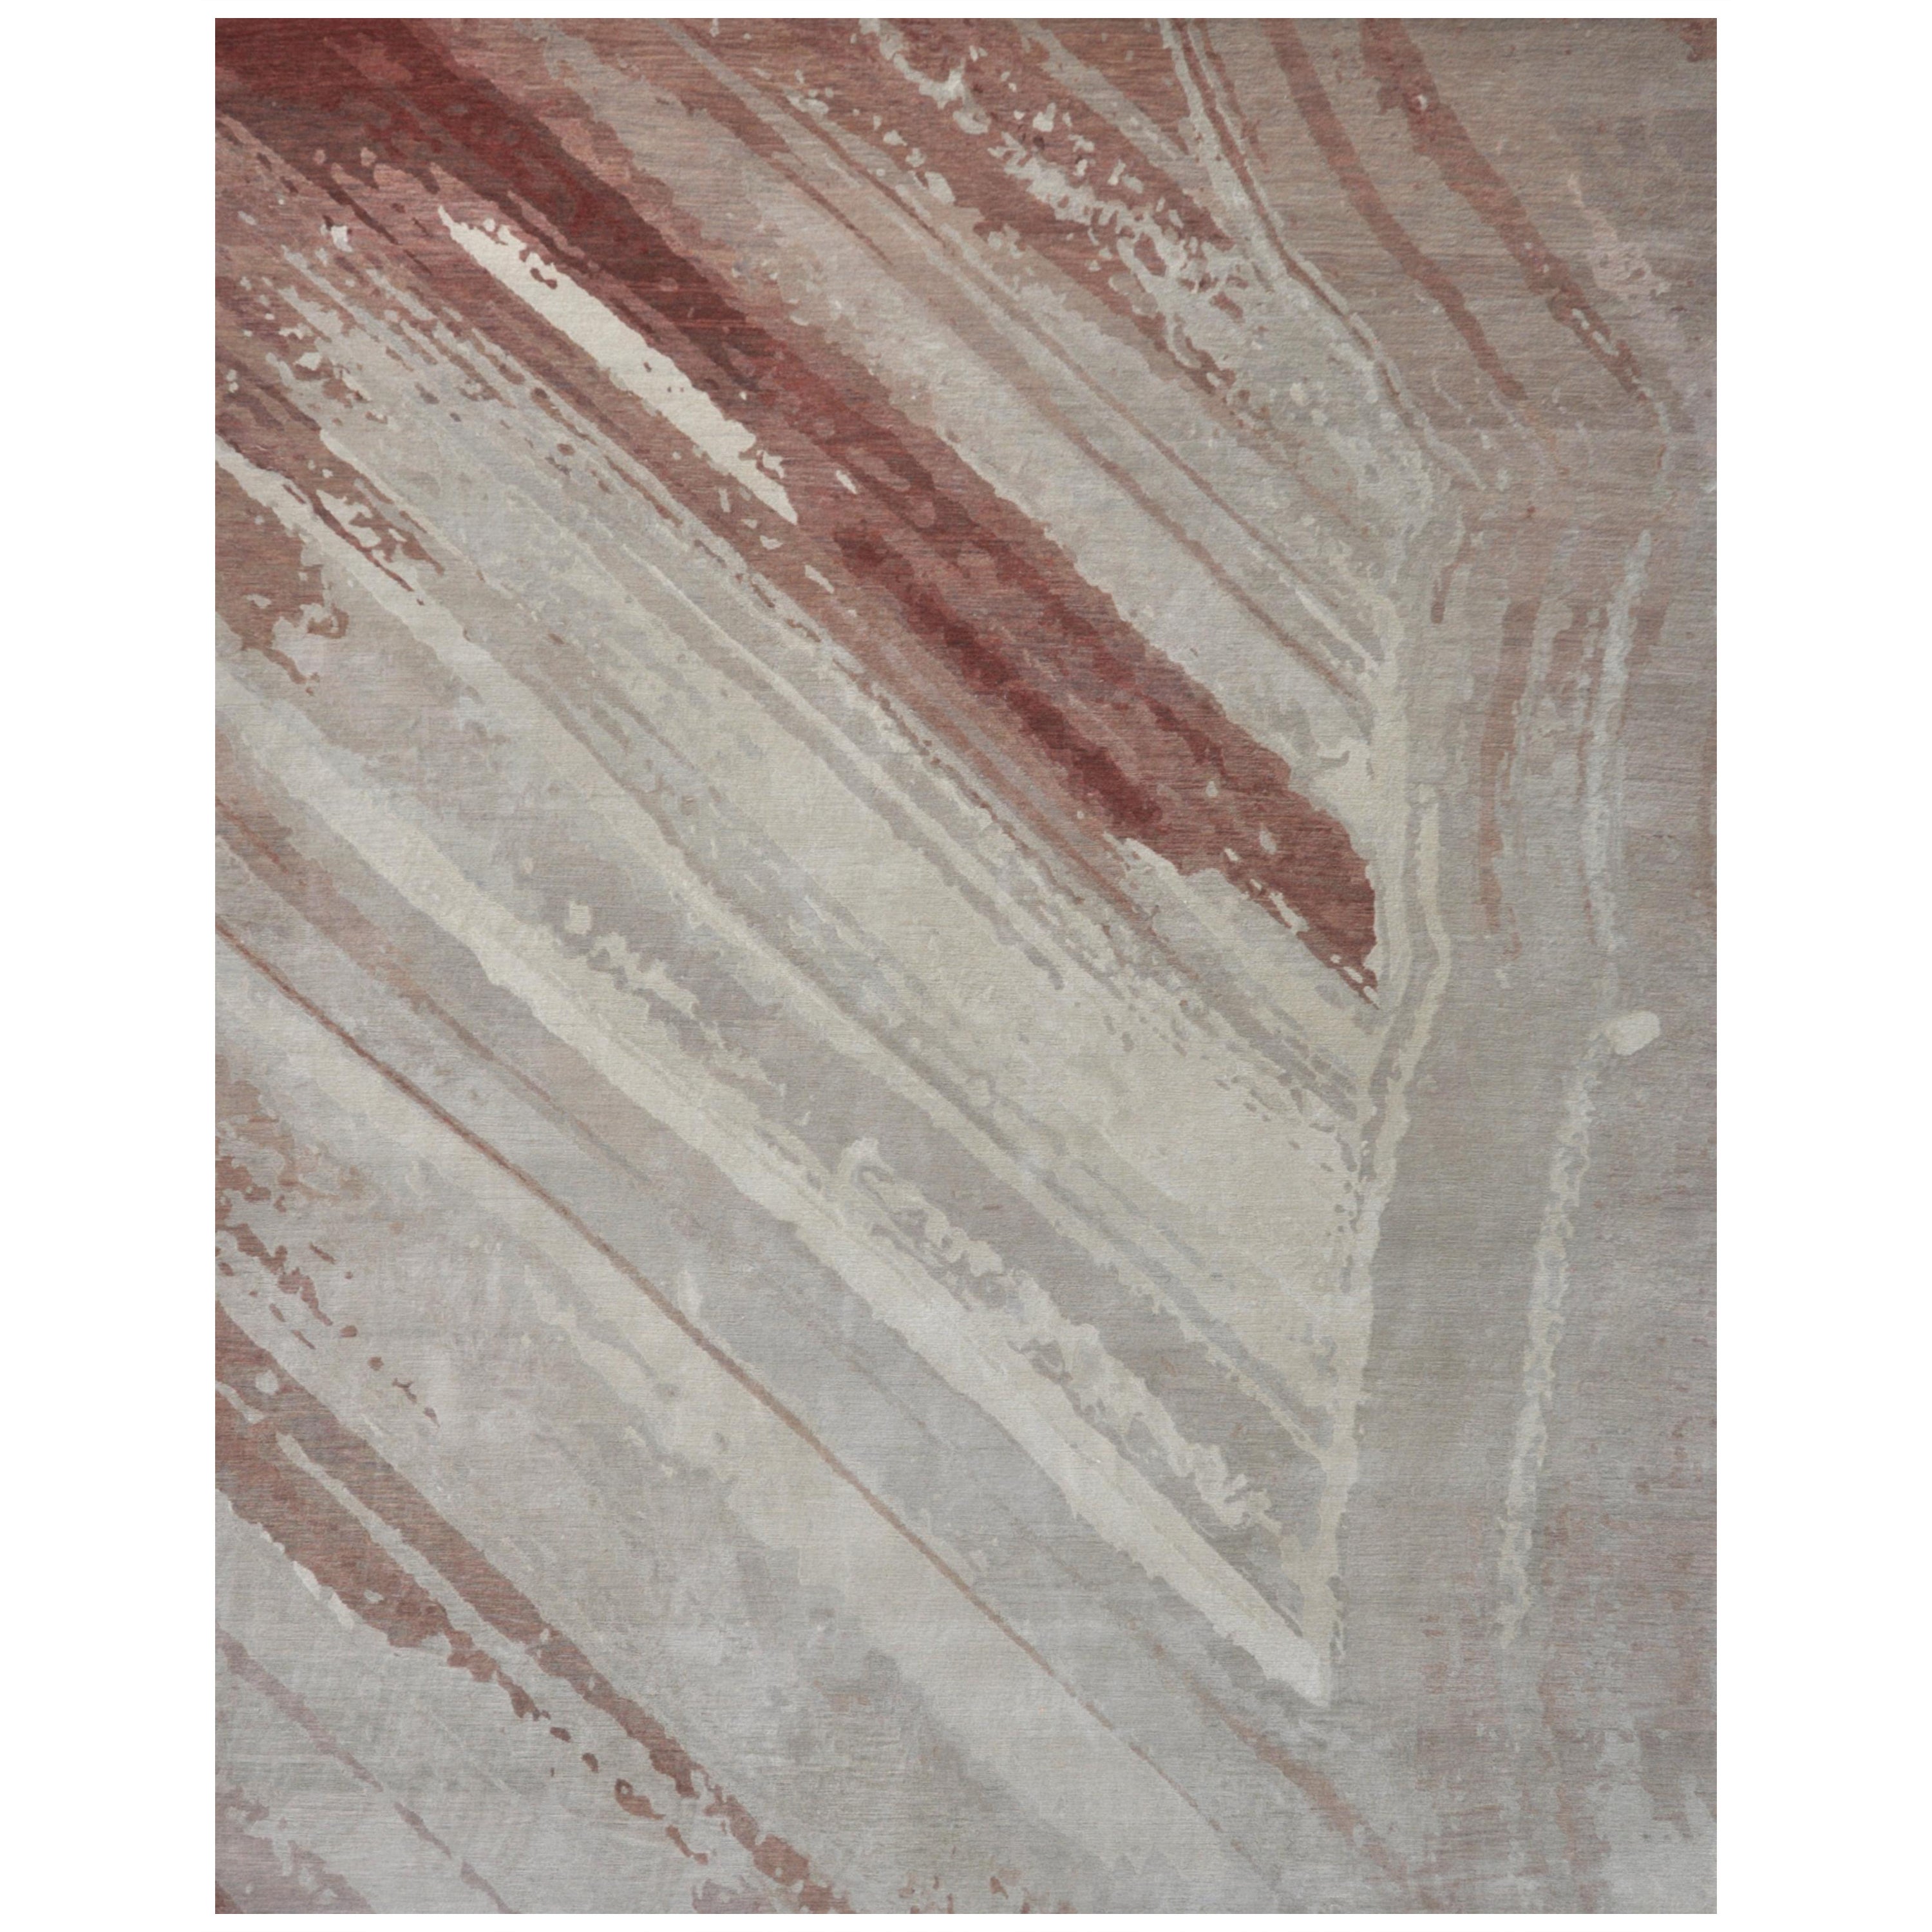 "Diavik - Burgundy + Gray" /  8' x 10' / Hand-Knotted Wool Rug For Sale